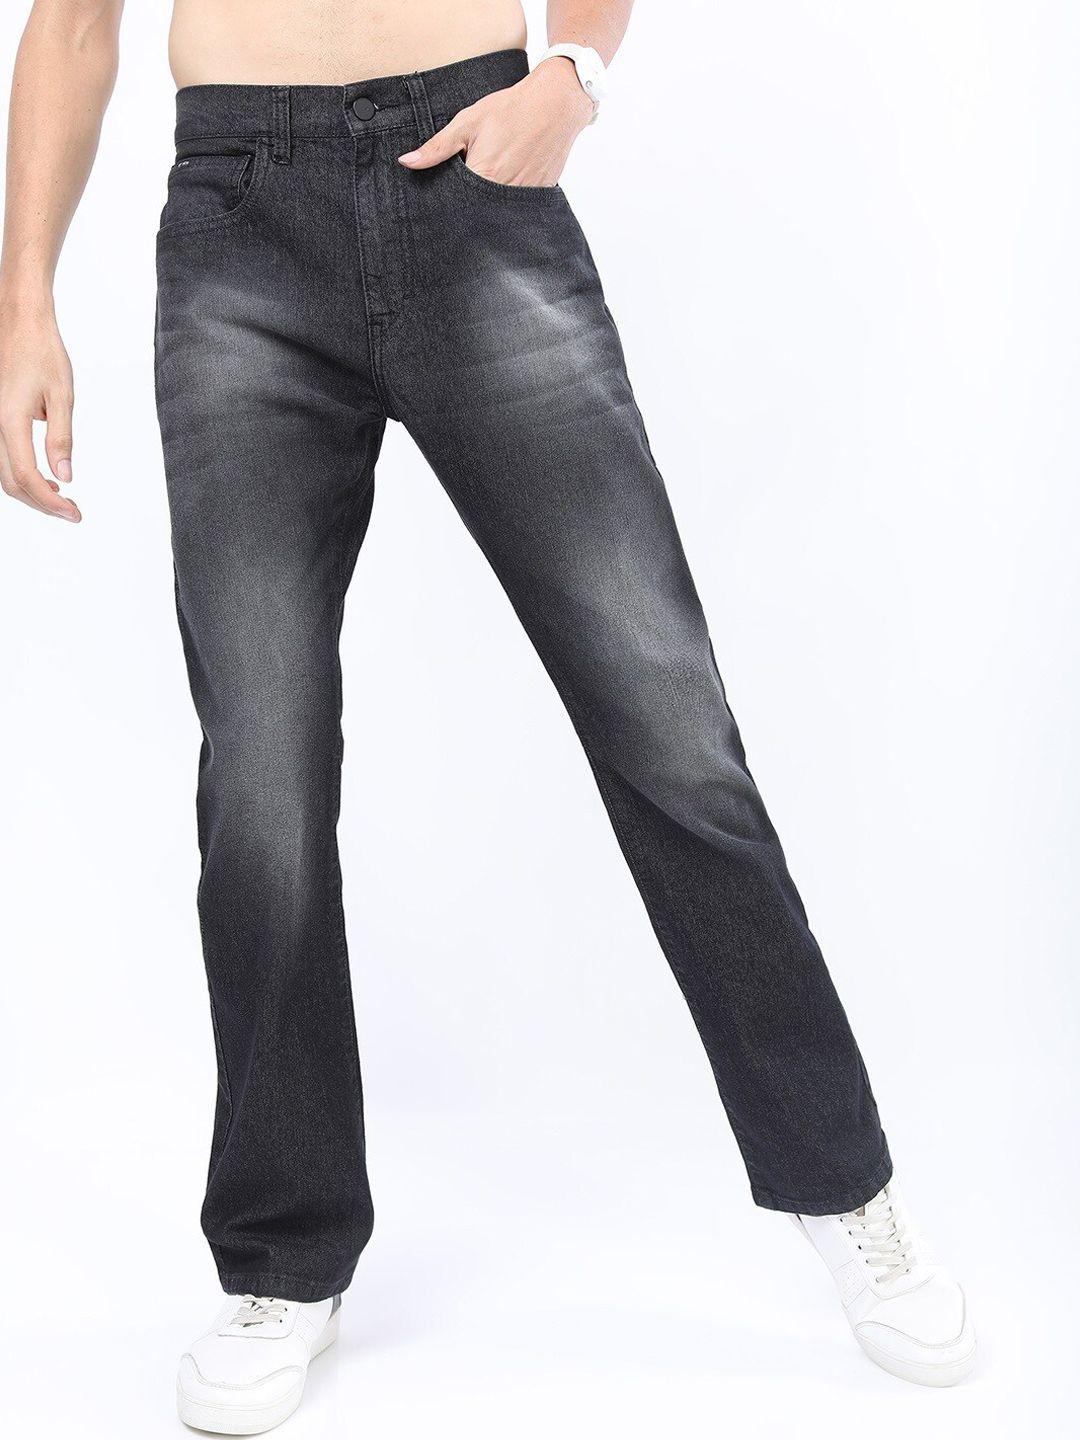 KETCH Men Charcoal Bootcut Light Fade Stretchable Jeans